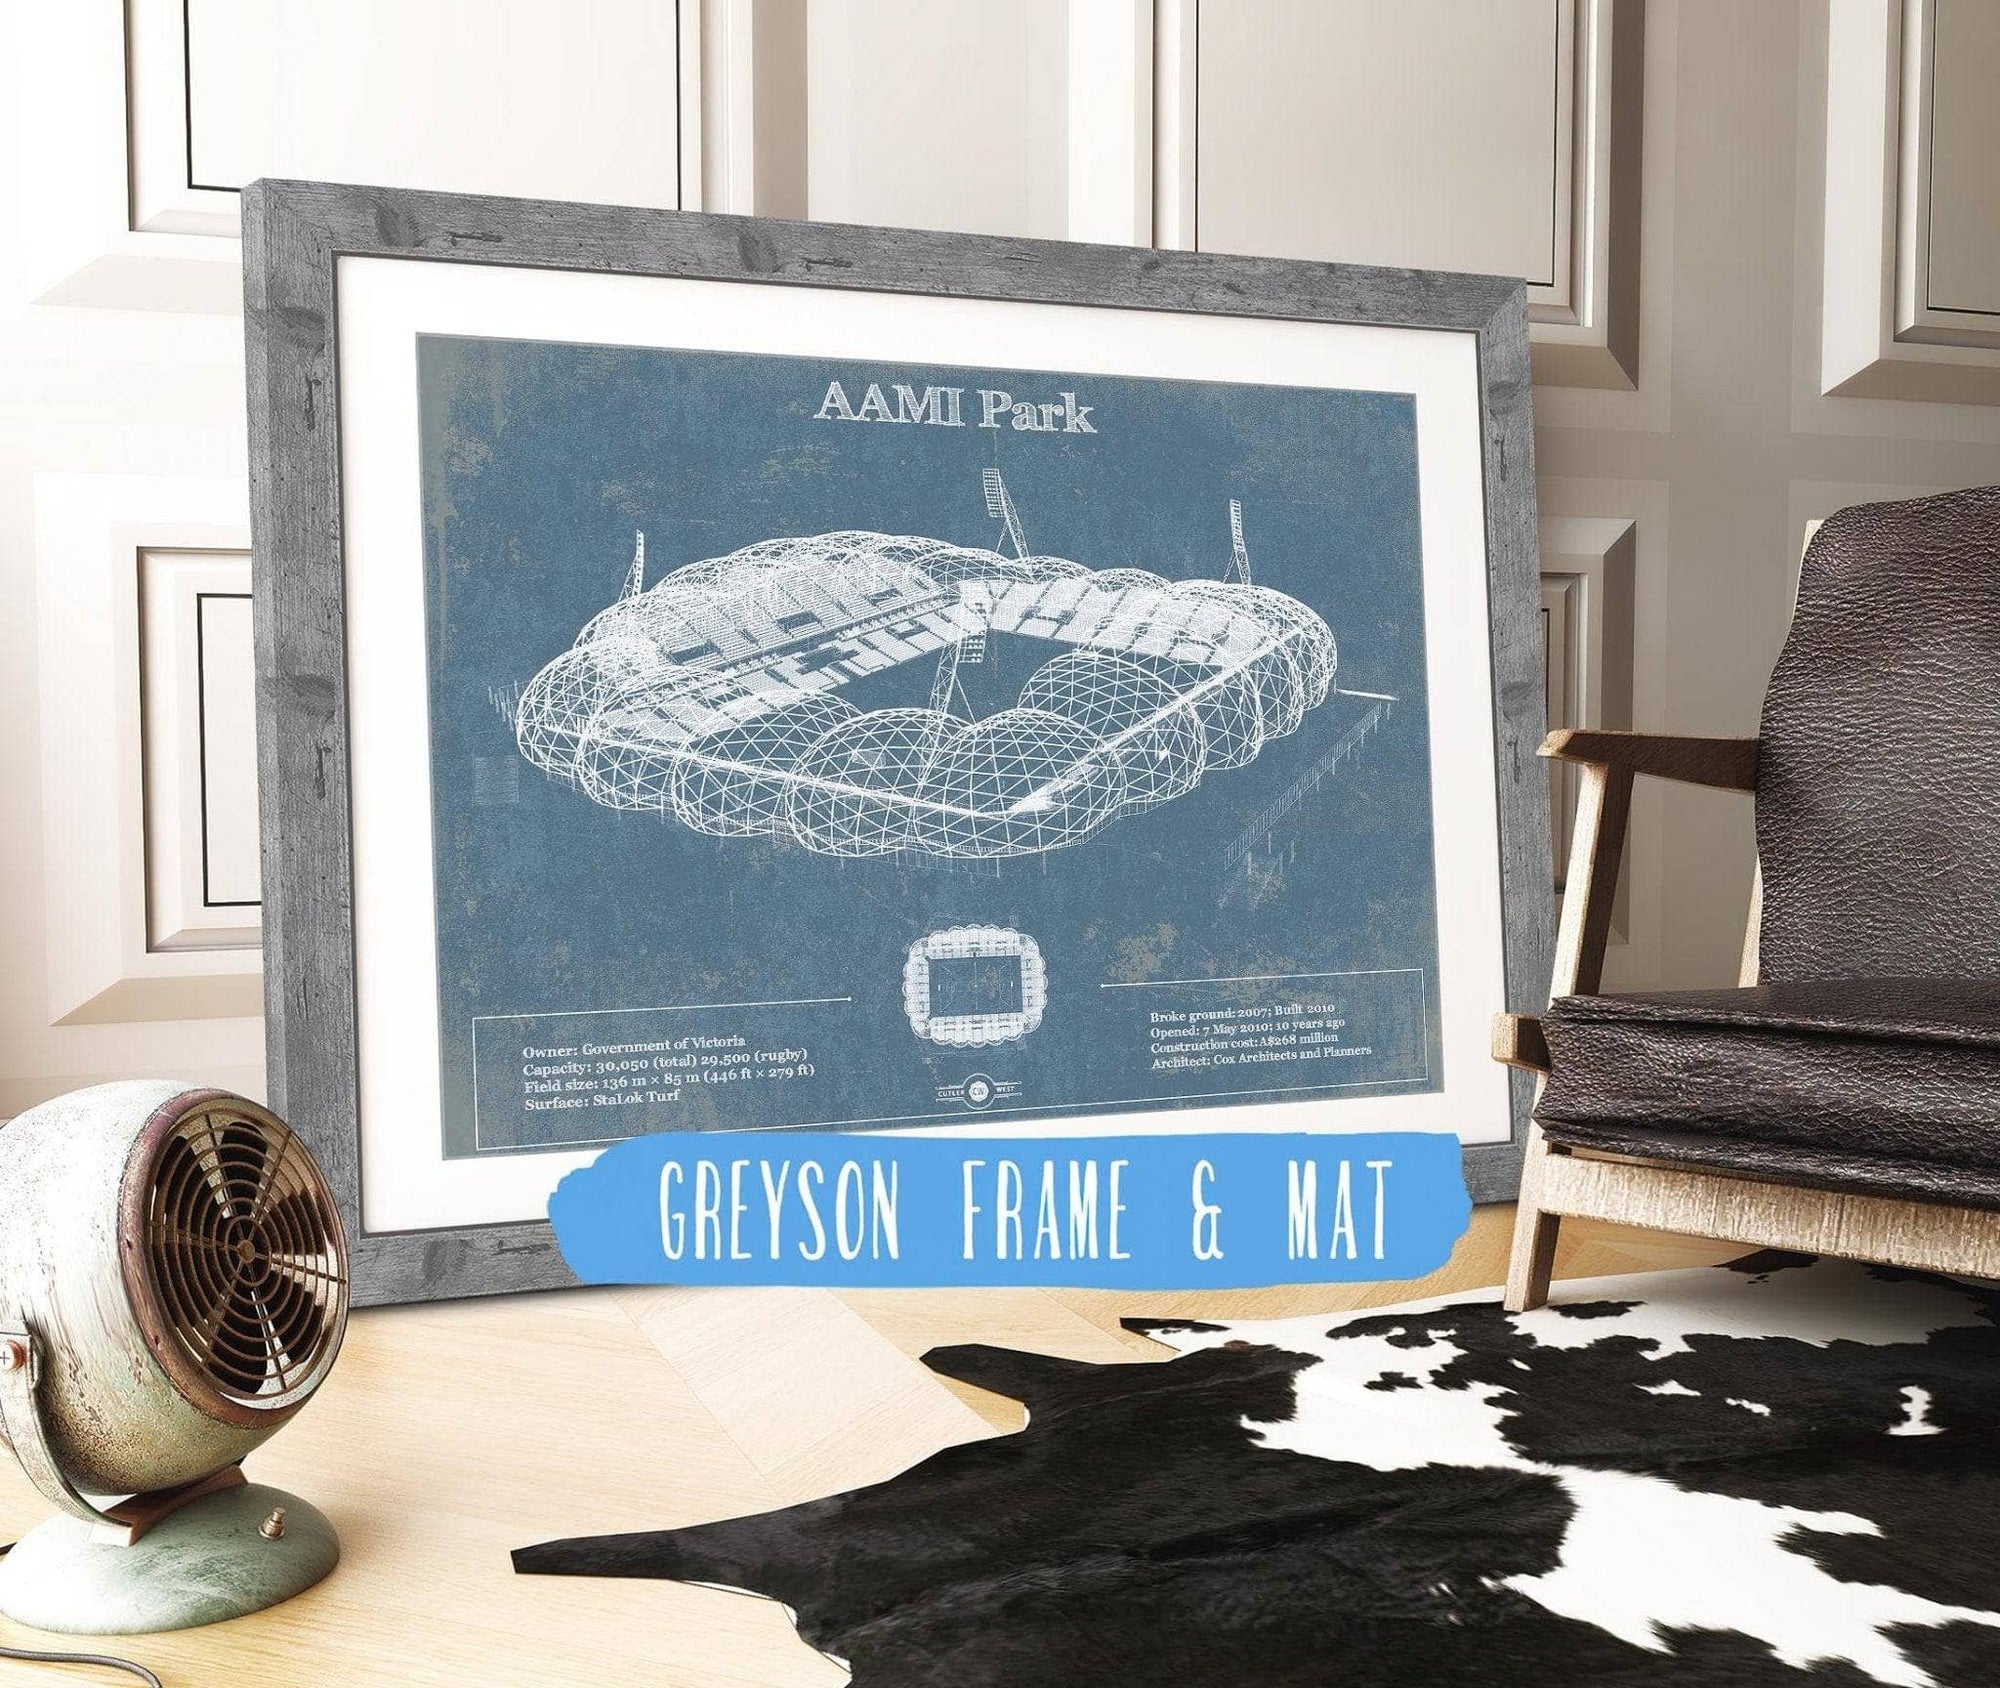 Cutler West Soccer Collection 14" x 11" / Greyson Frame & Mat AAMI Park Vintage Australia Rugby and Soccer Stadium Print 950525819_37063